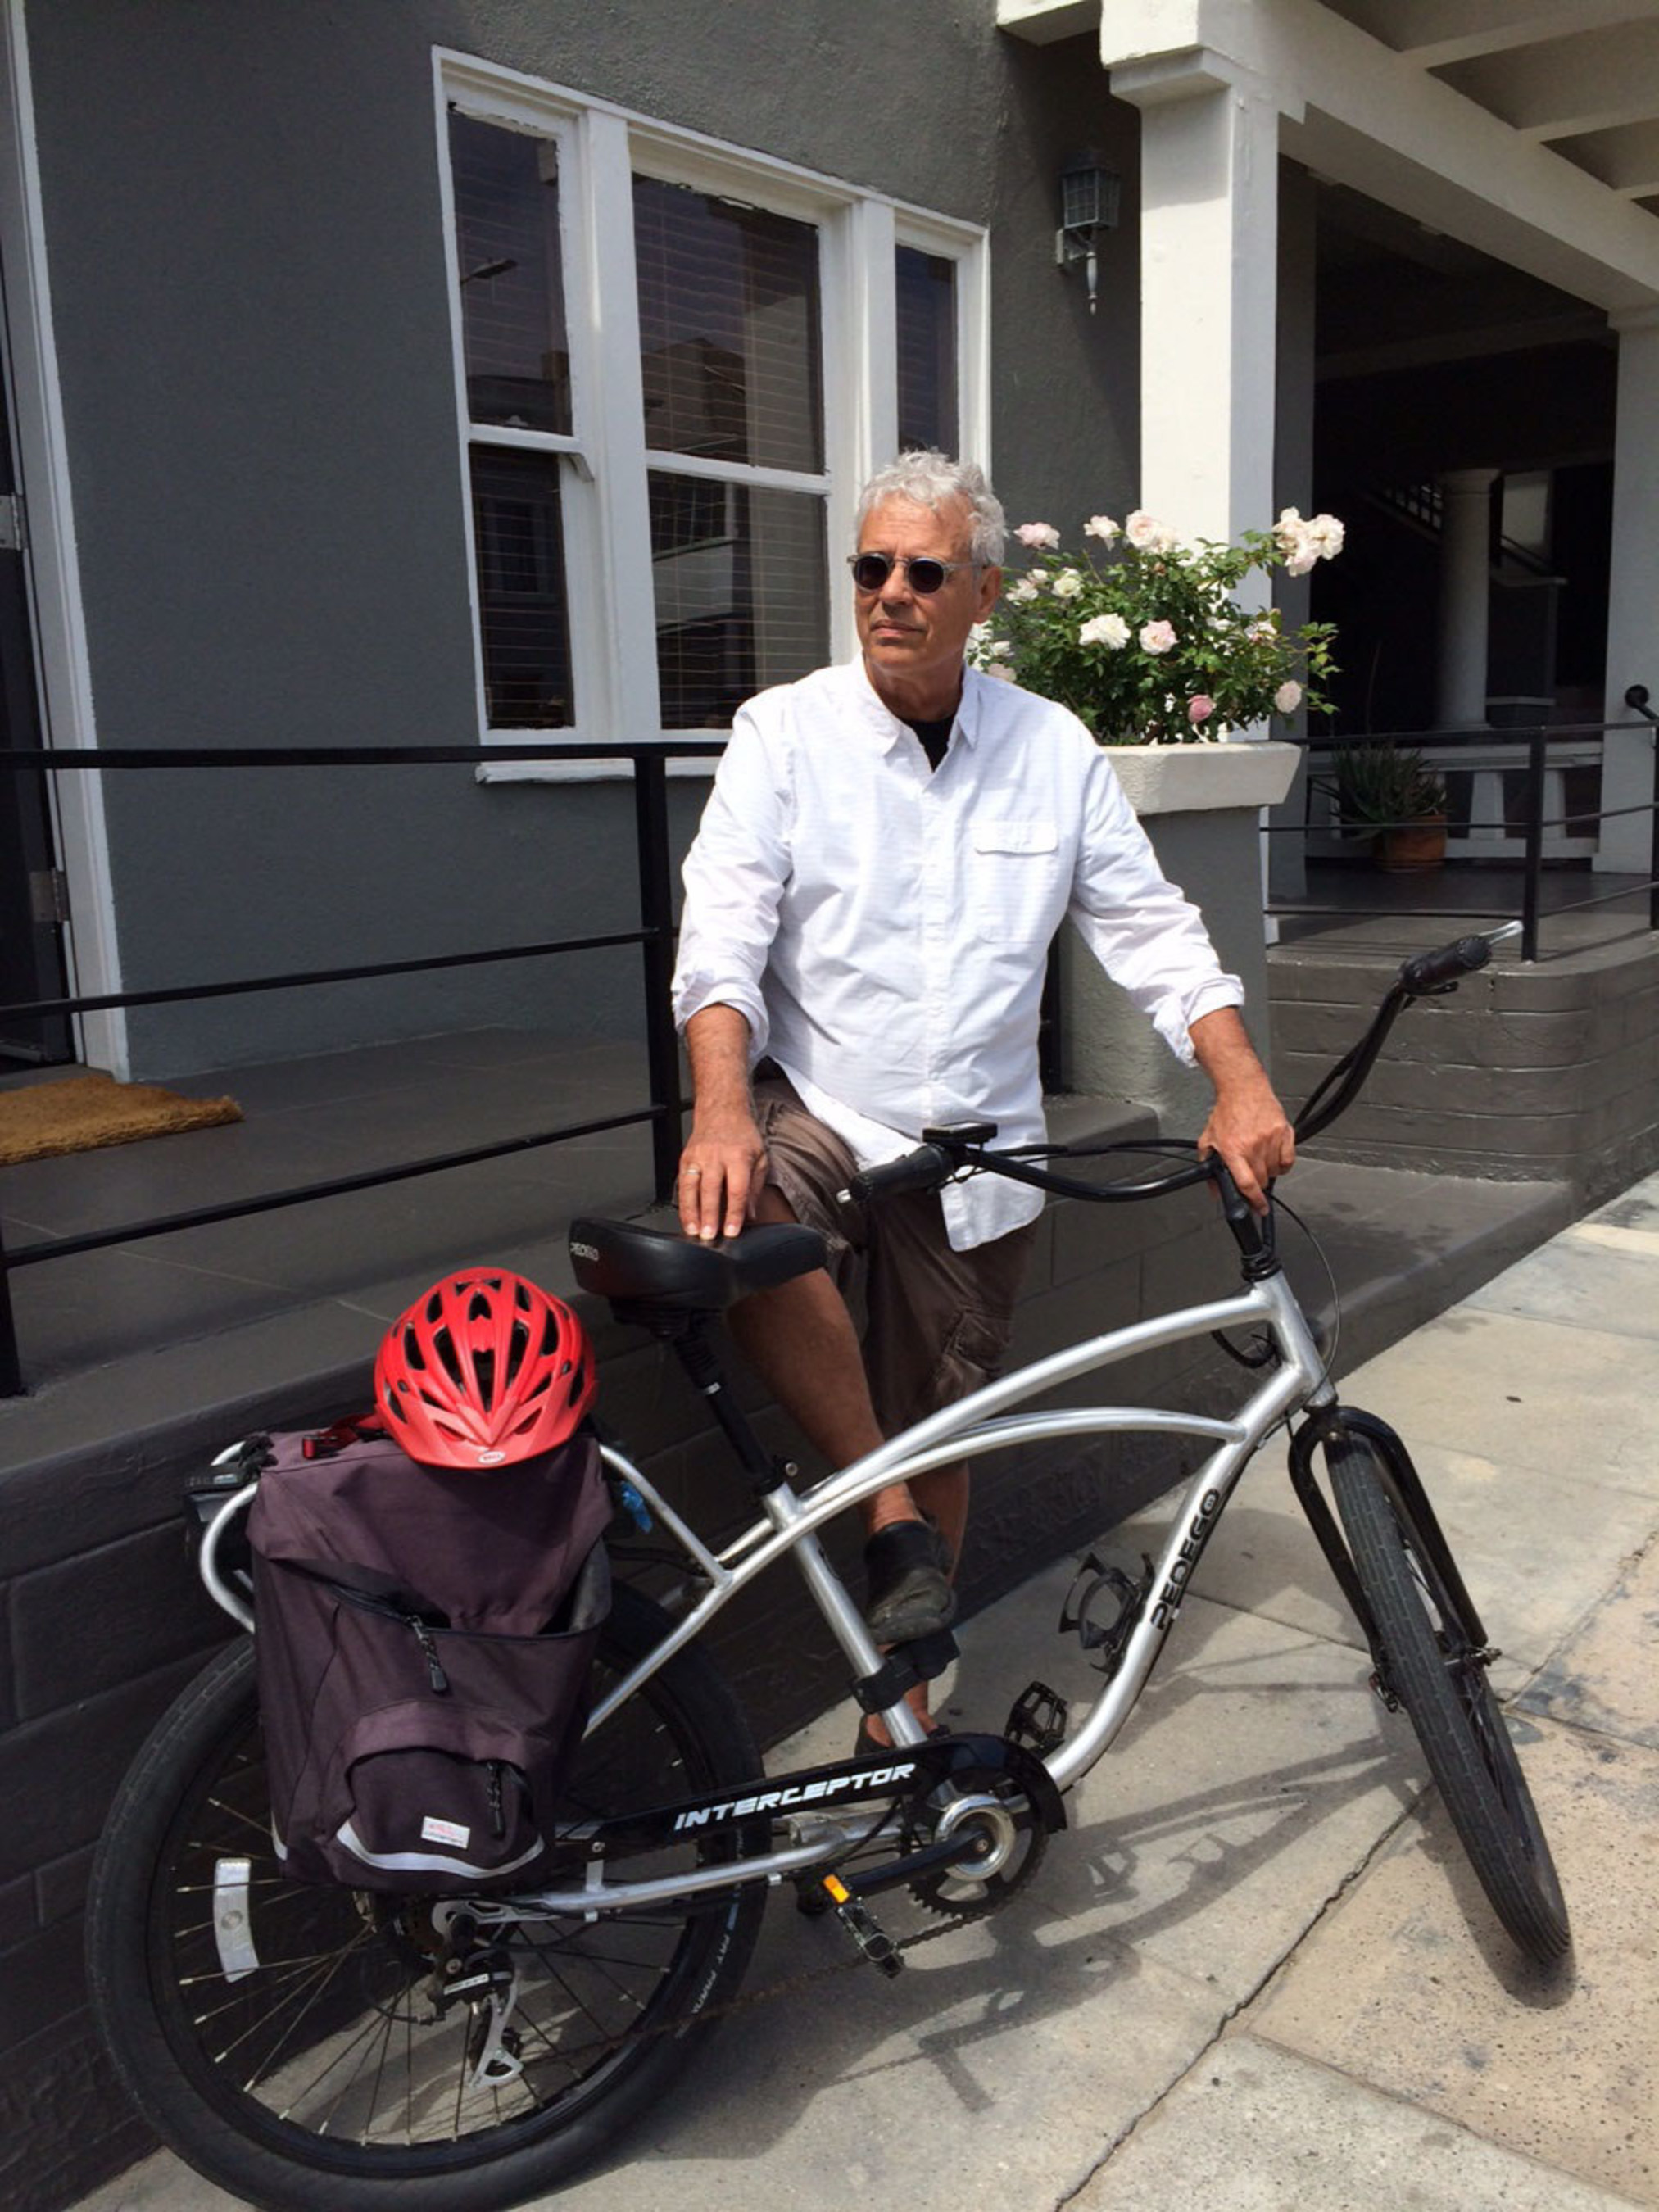 Bill Borden, 63, a producer of more than 35 films including the High School Musical series, Desperado and La Bamba, commutes to work on his Pedego Interceptor, allowing him to enjoy daily exercise, sunshine and fresh air while avoiding stress from traffic and limited parking.